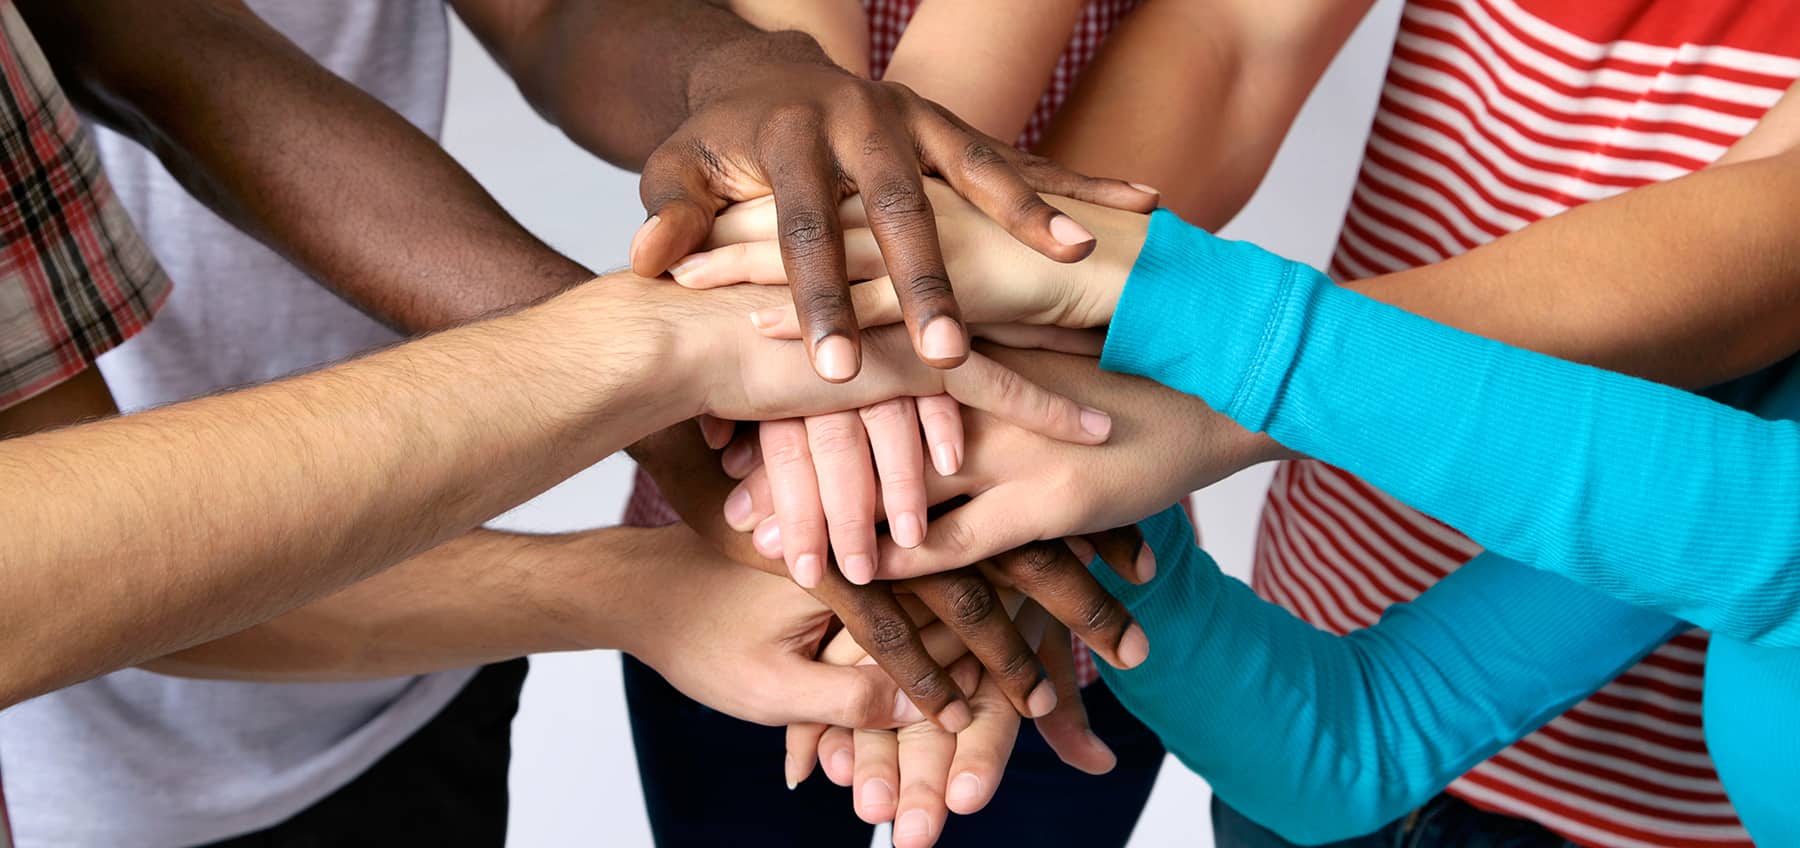 A variety of people from diverse backgrounds stacking hands